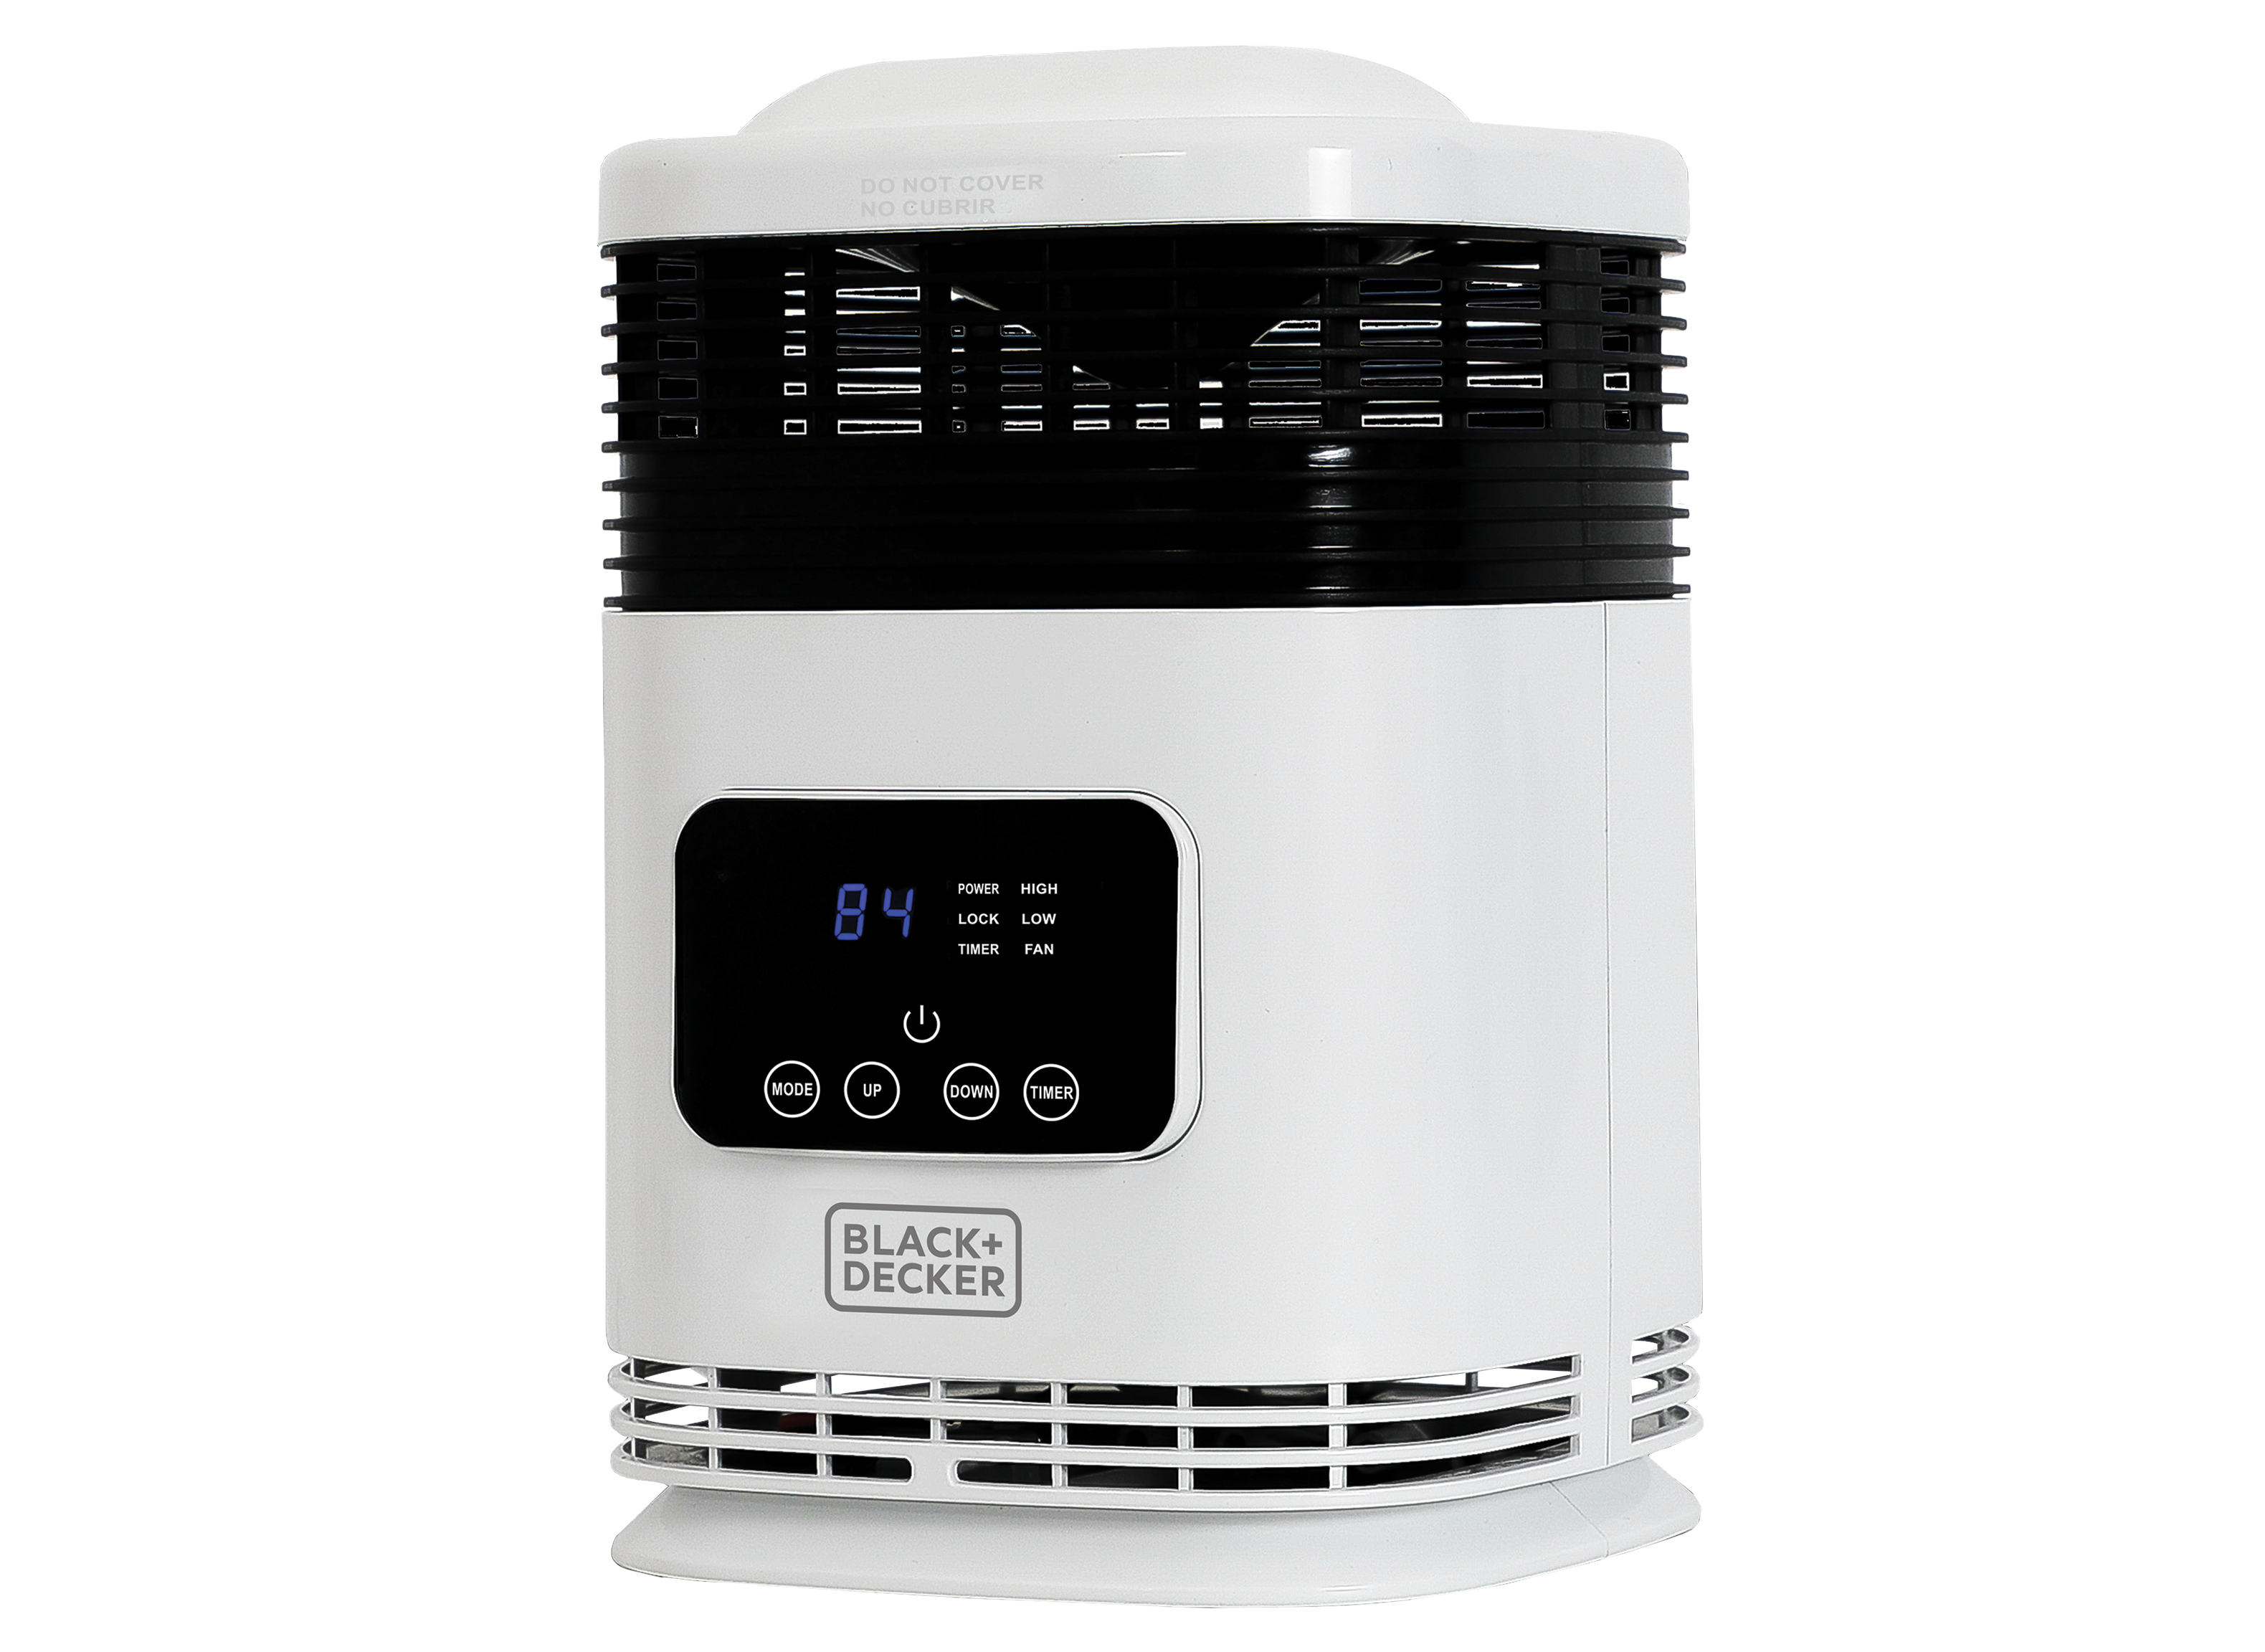 https://crdms.images.consumerreports.org/prod/products/cr/models/407406-smaller-heaters-black-decker-bh1607-10030941.png